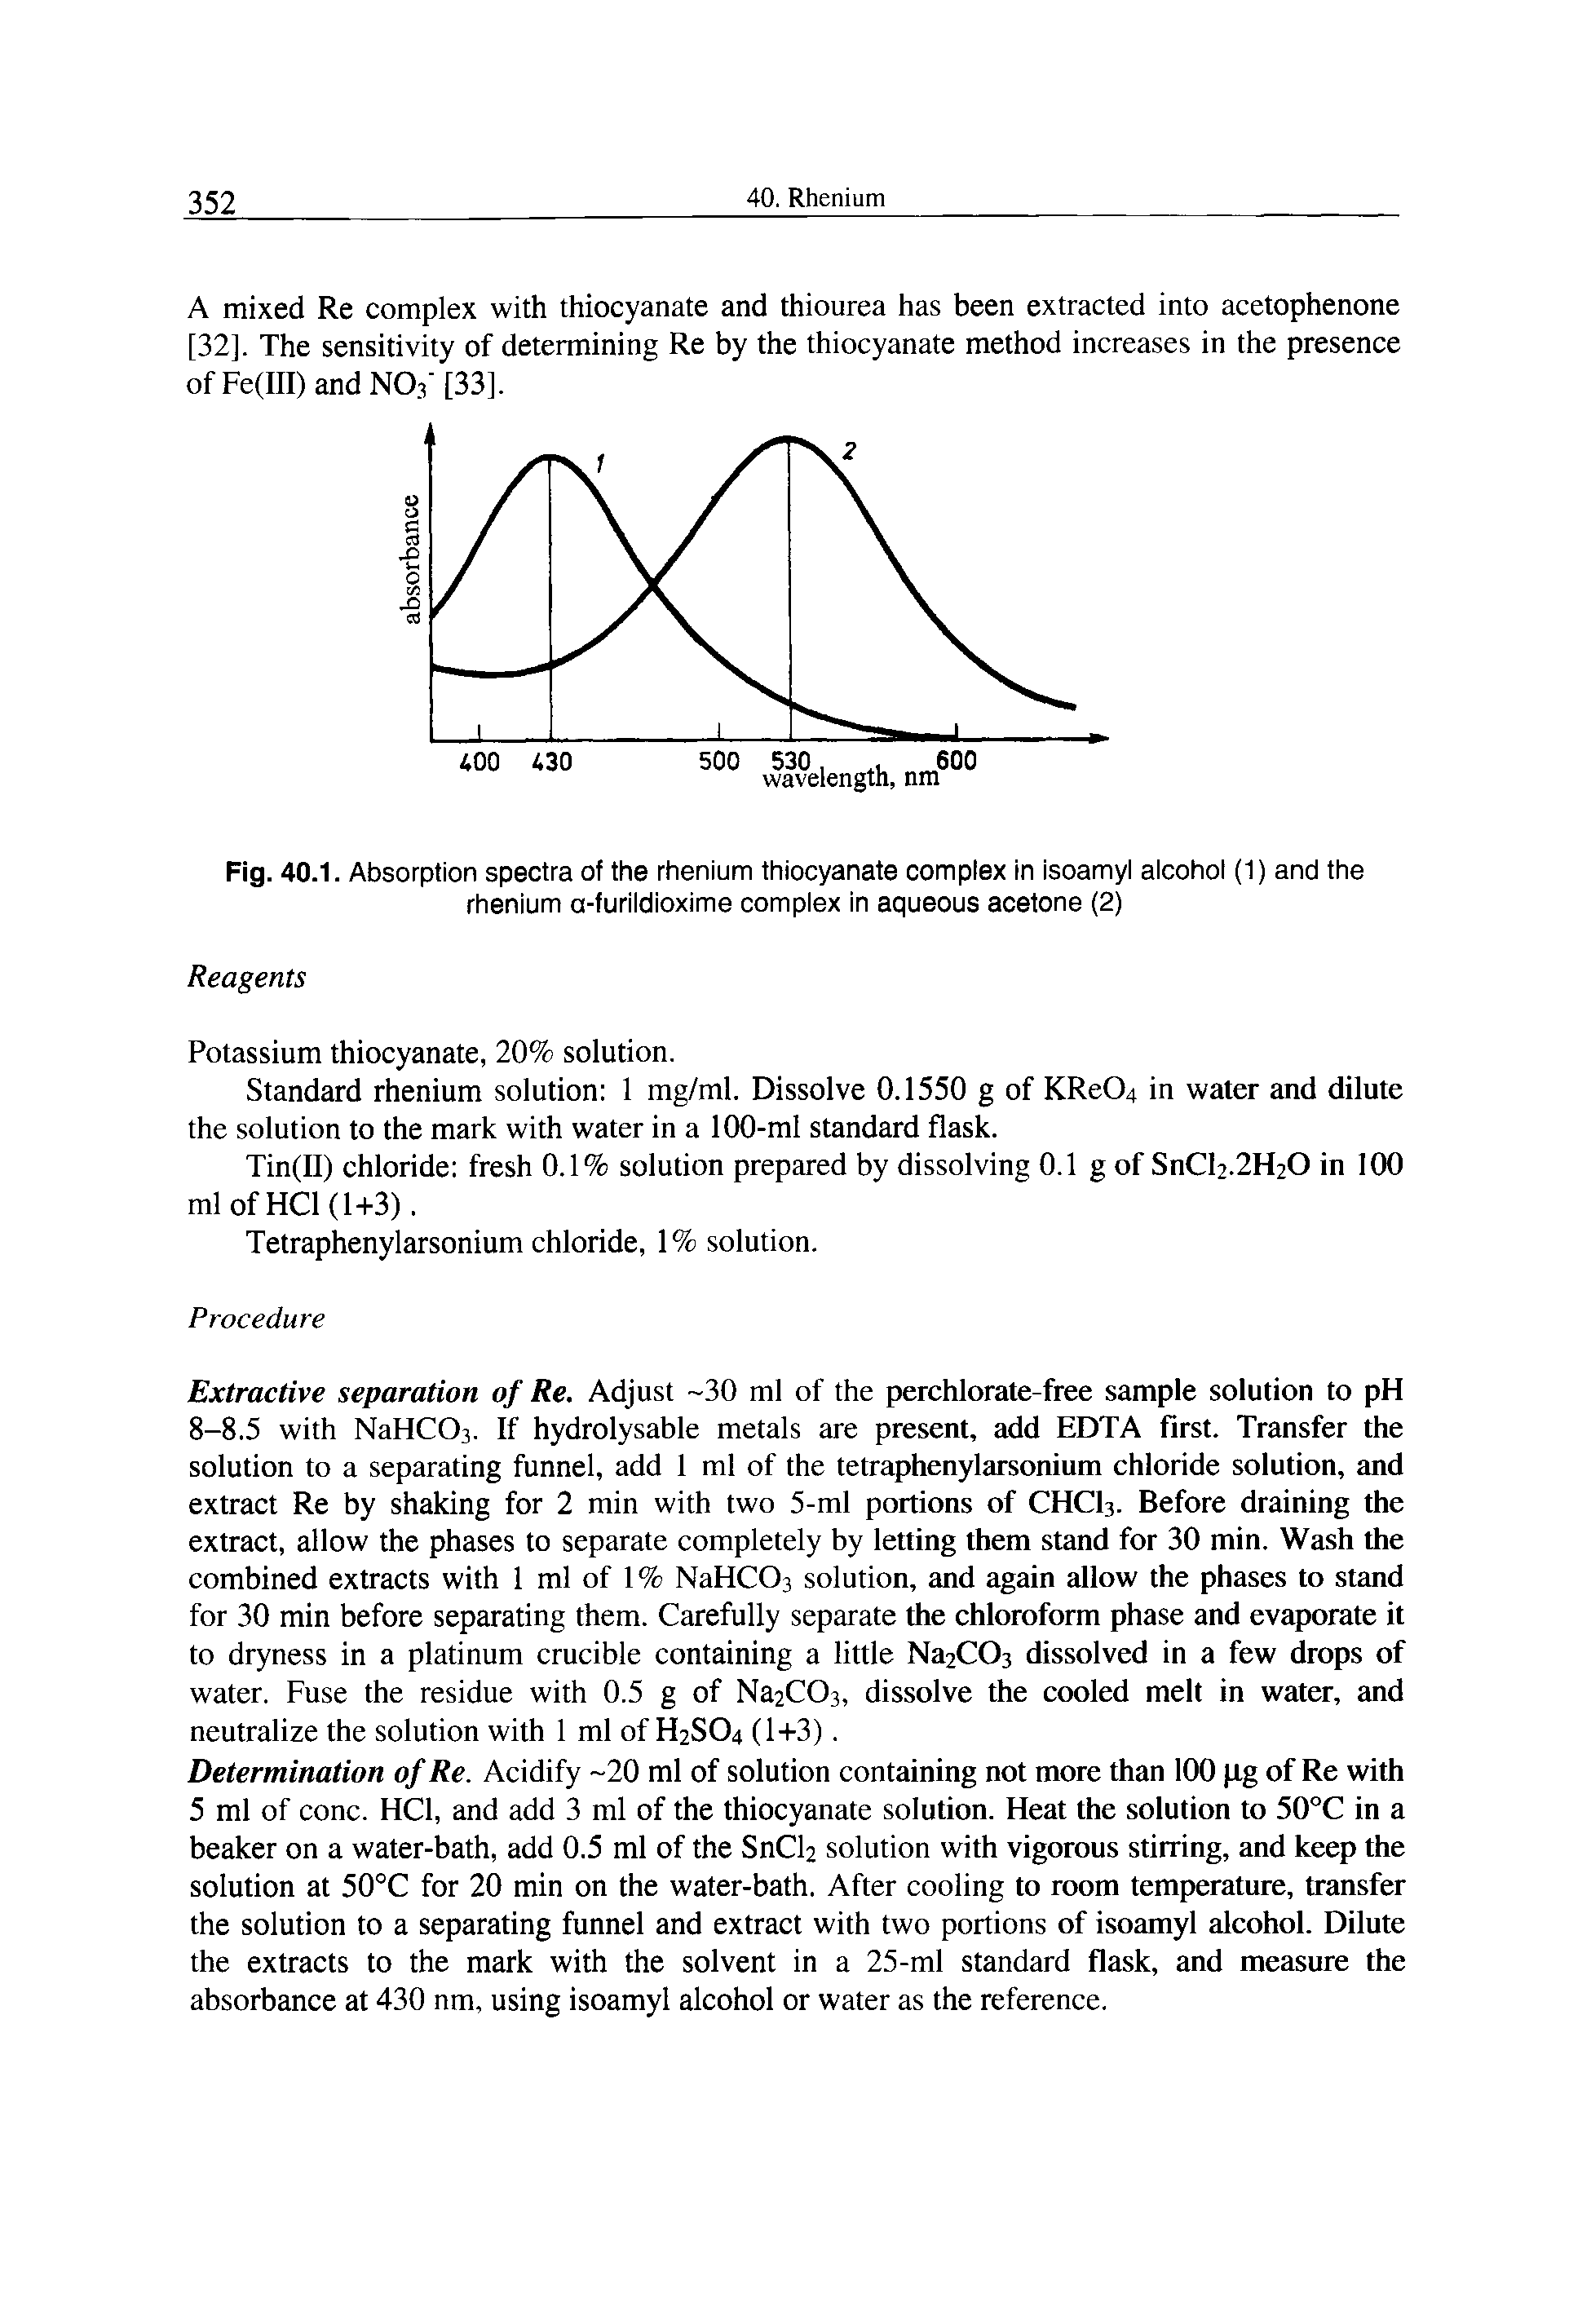 Fig. 40.1. Absorption spectra of the rhenium thiocyanate complex in isoamyi aicohol (1) and the rhenium a-furildioxime compiex in aqueous acetone (2)...